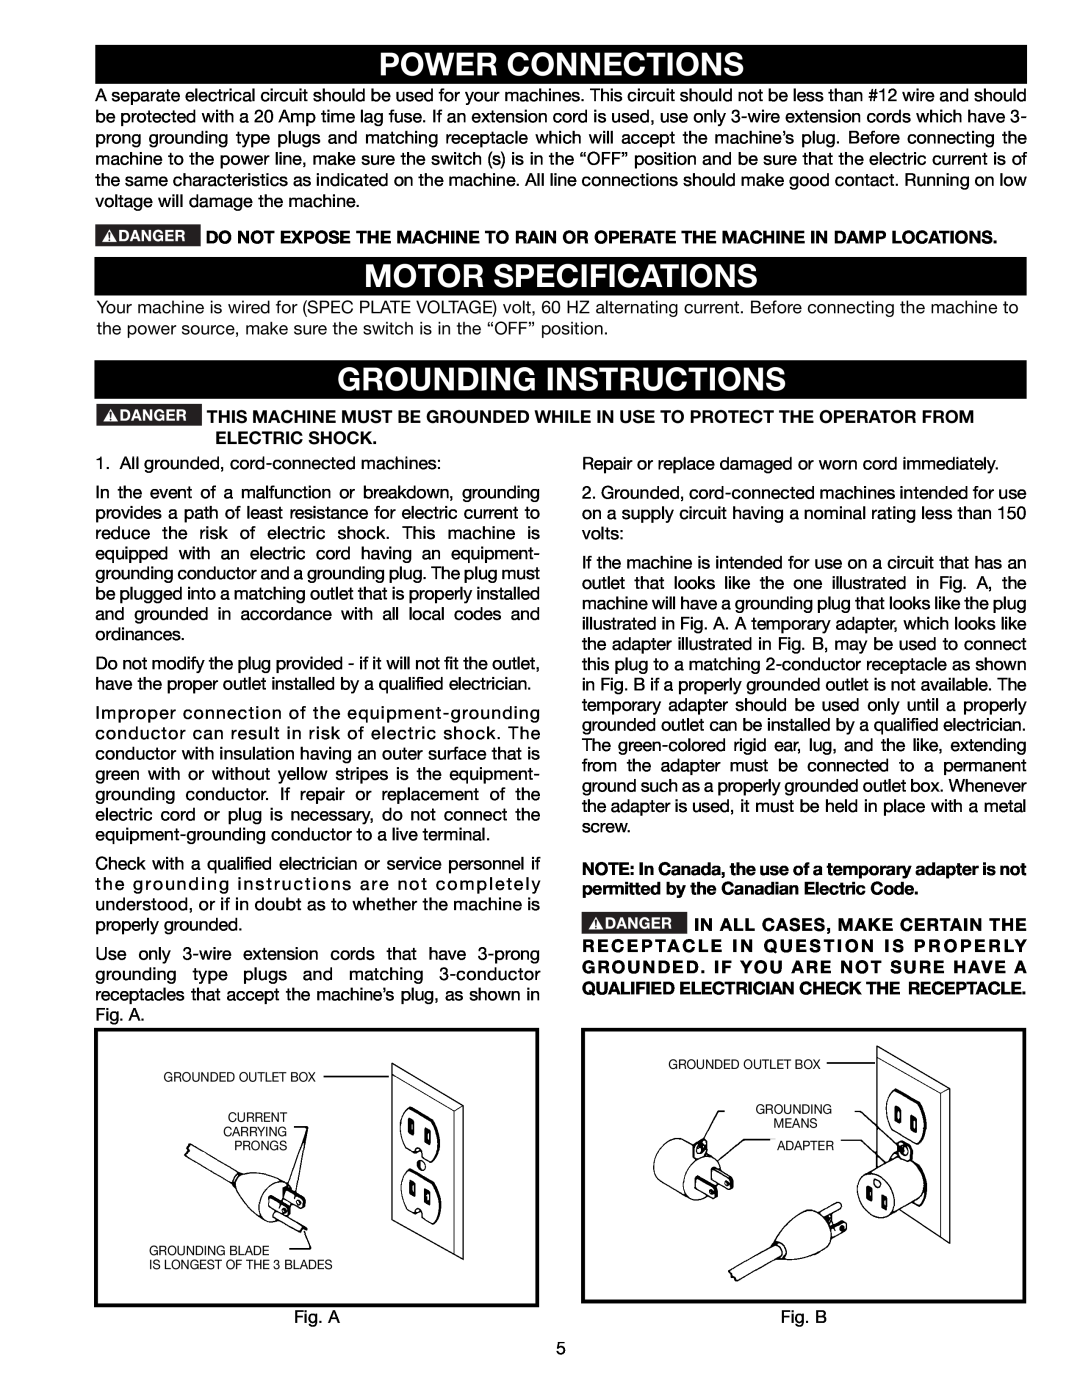 Delta 36-465 instruction manual Power Connections, Motor Specifications, Grounding Instructions 